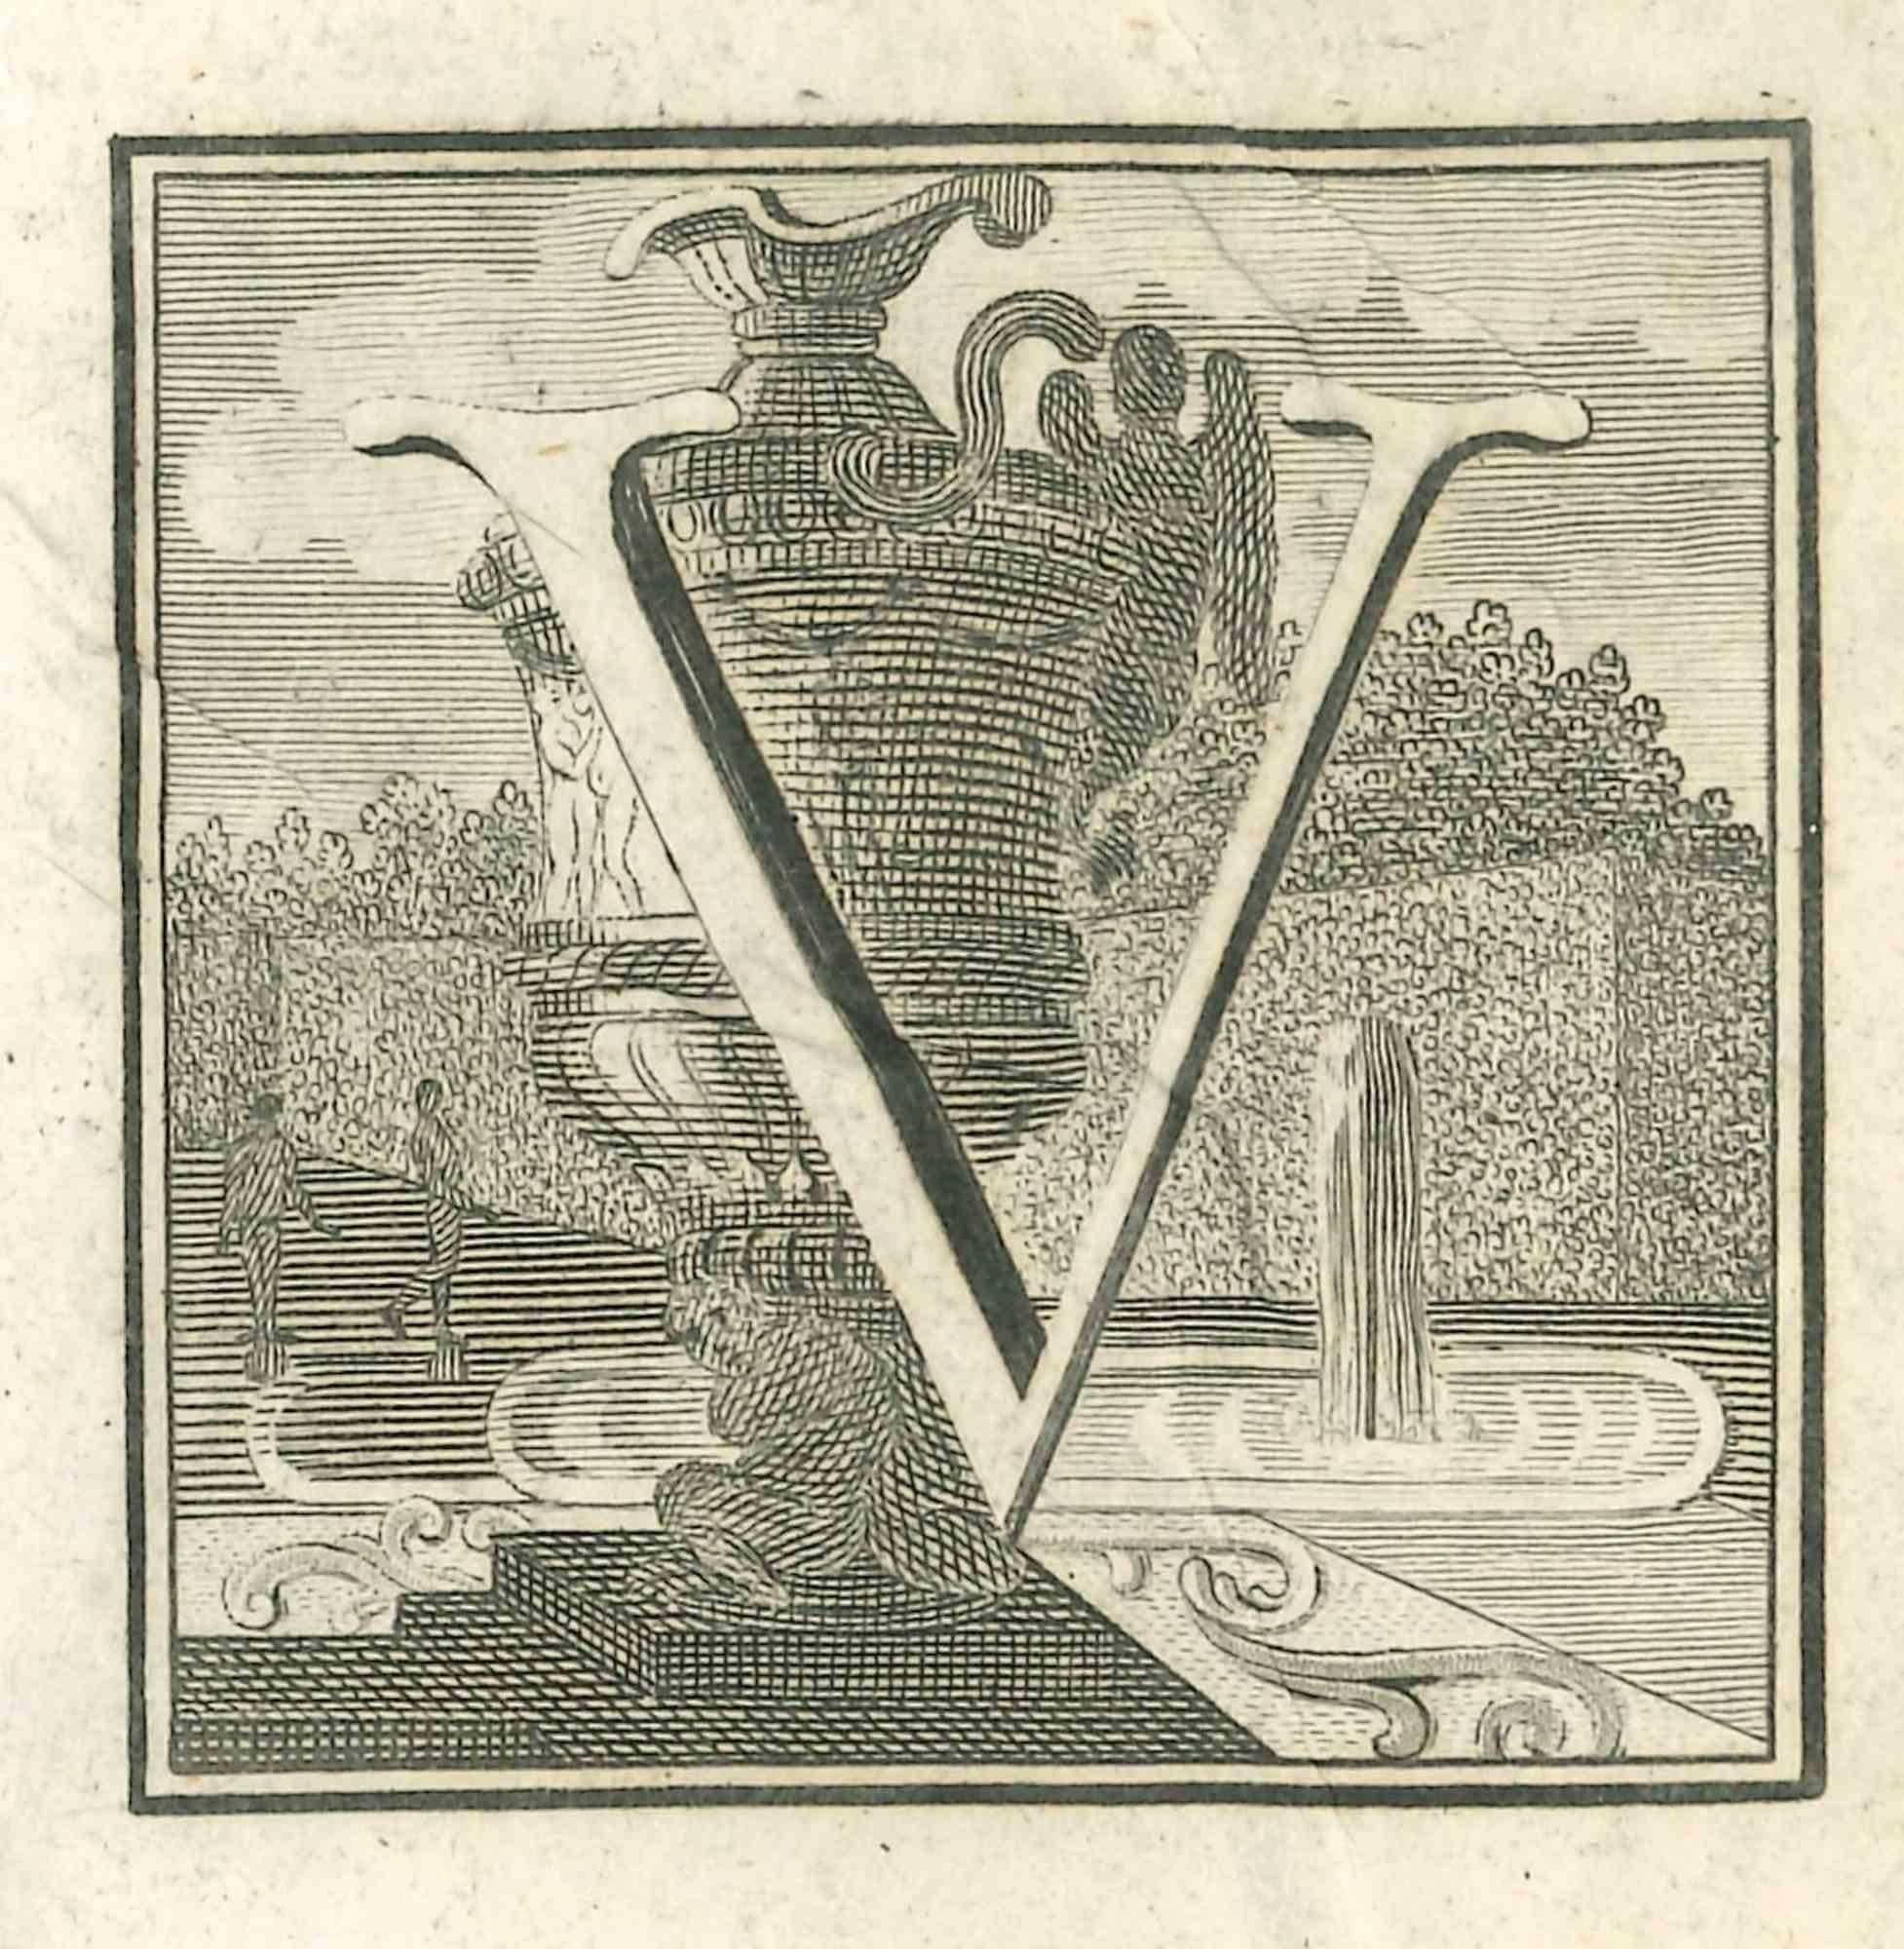 Letter A is an Etching realized by Luigi Vanvitelli.

The etching belongs to the print suite “Antiquities of Herculaneum Exposed” (original title: “Le Antichità di Ercolano Esposte”), an eight-volume volume of engravings of the finds from the